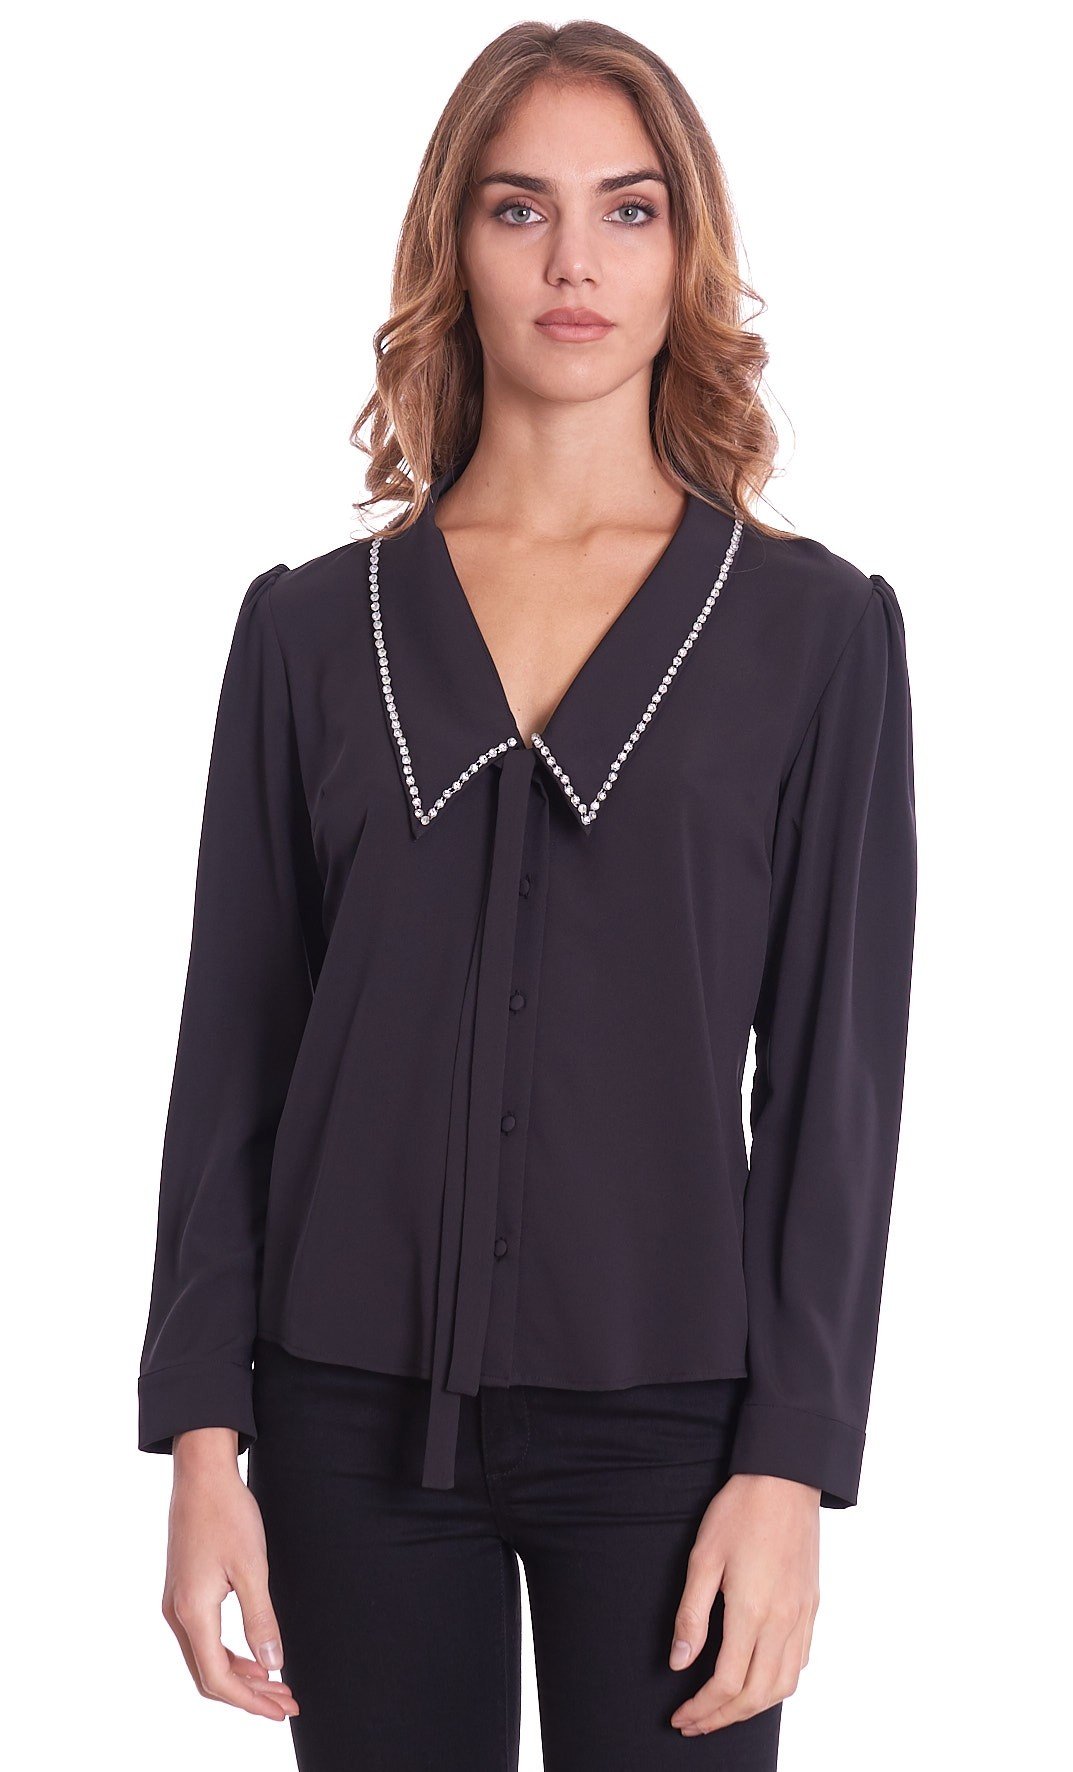 Women's shirt Luckylu with studs and covered buttons BL01CD